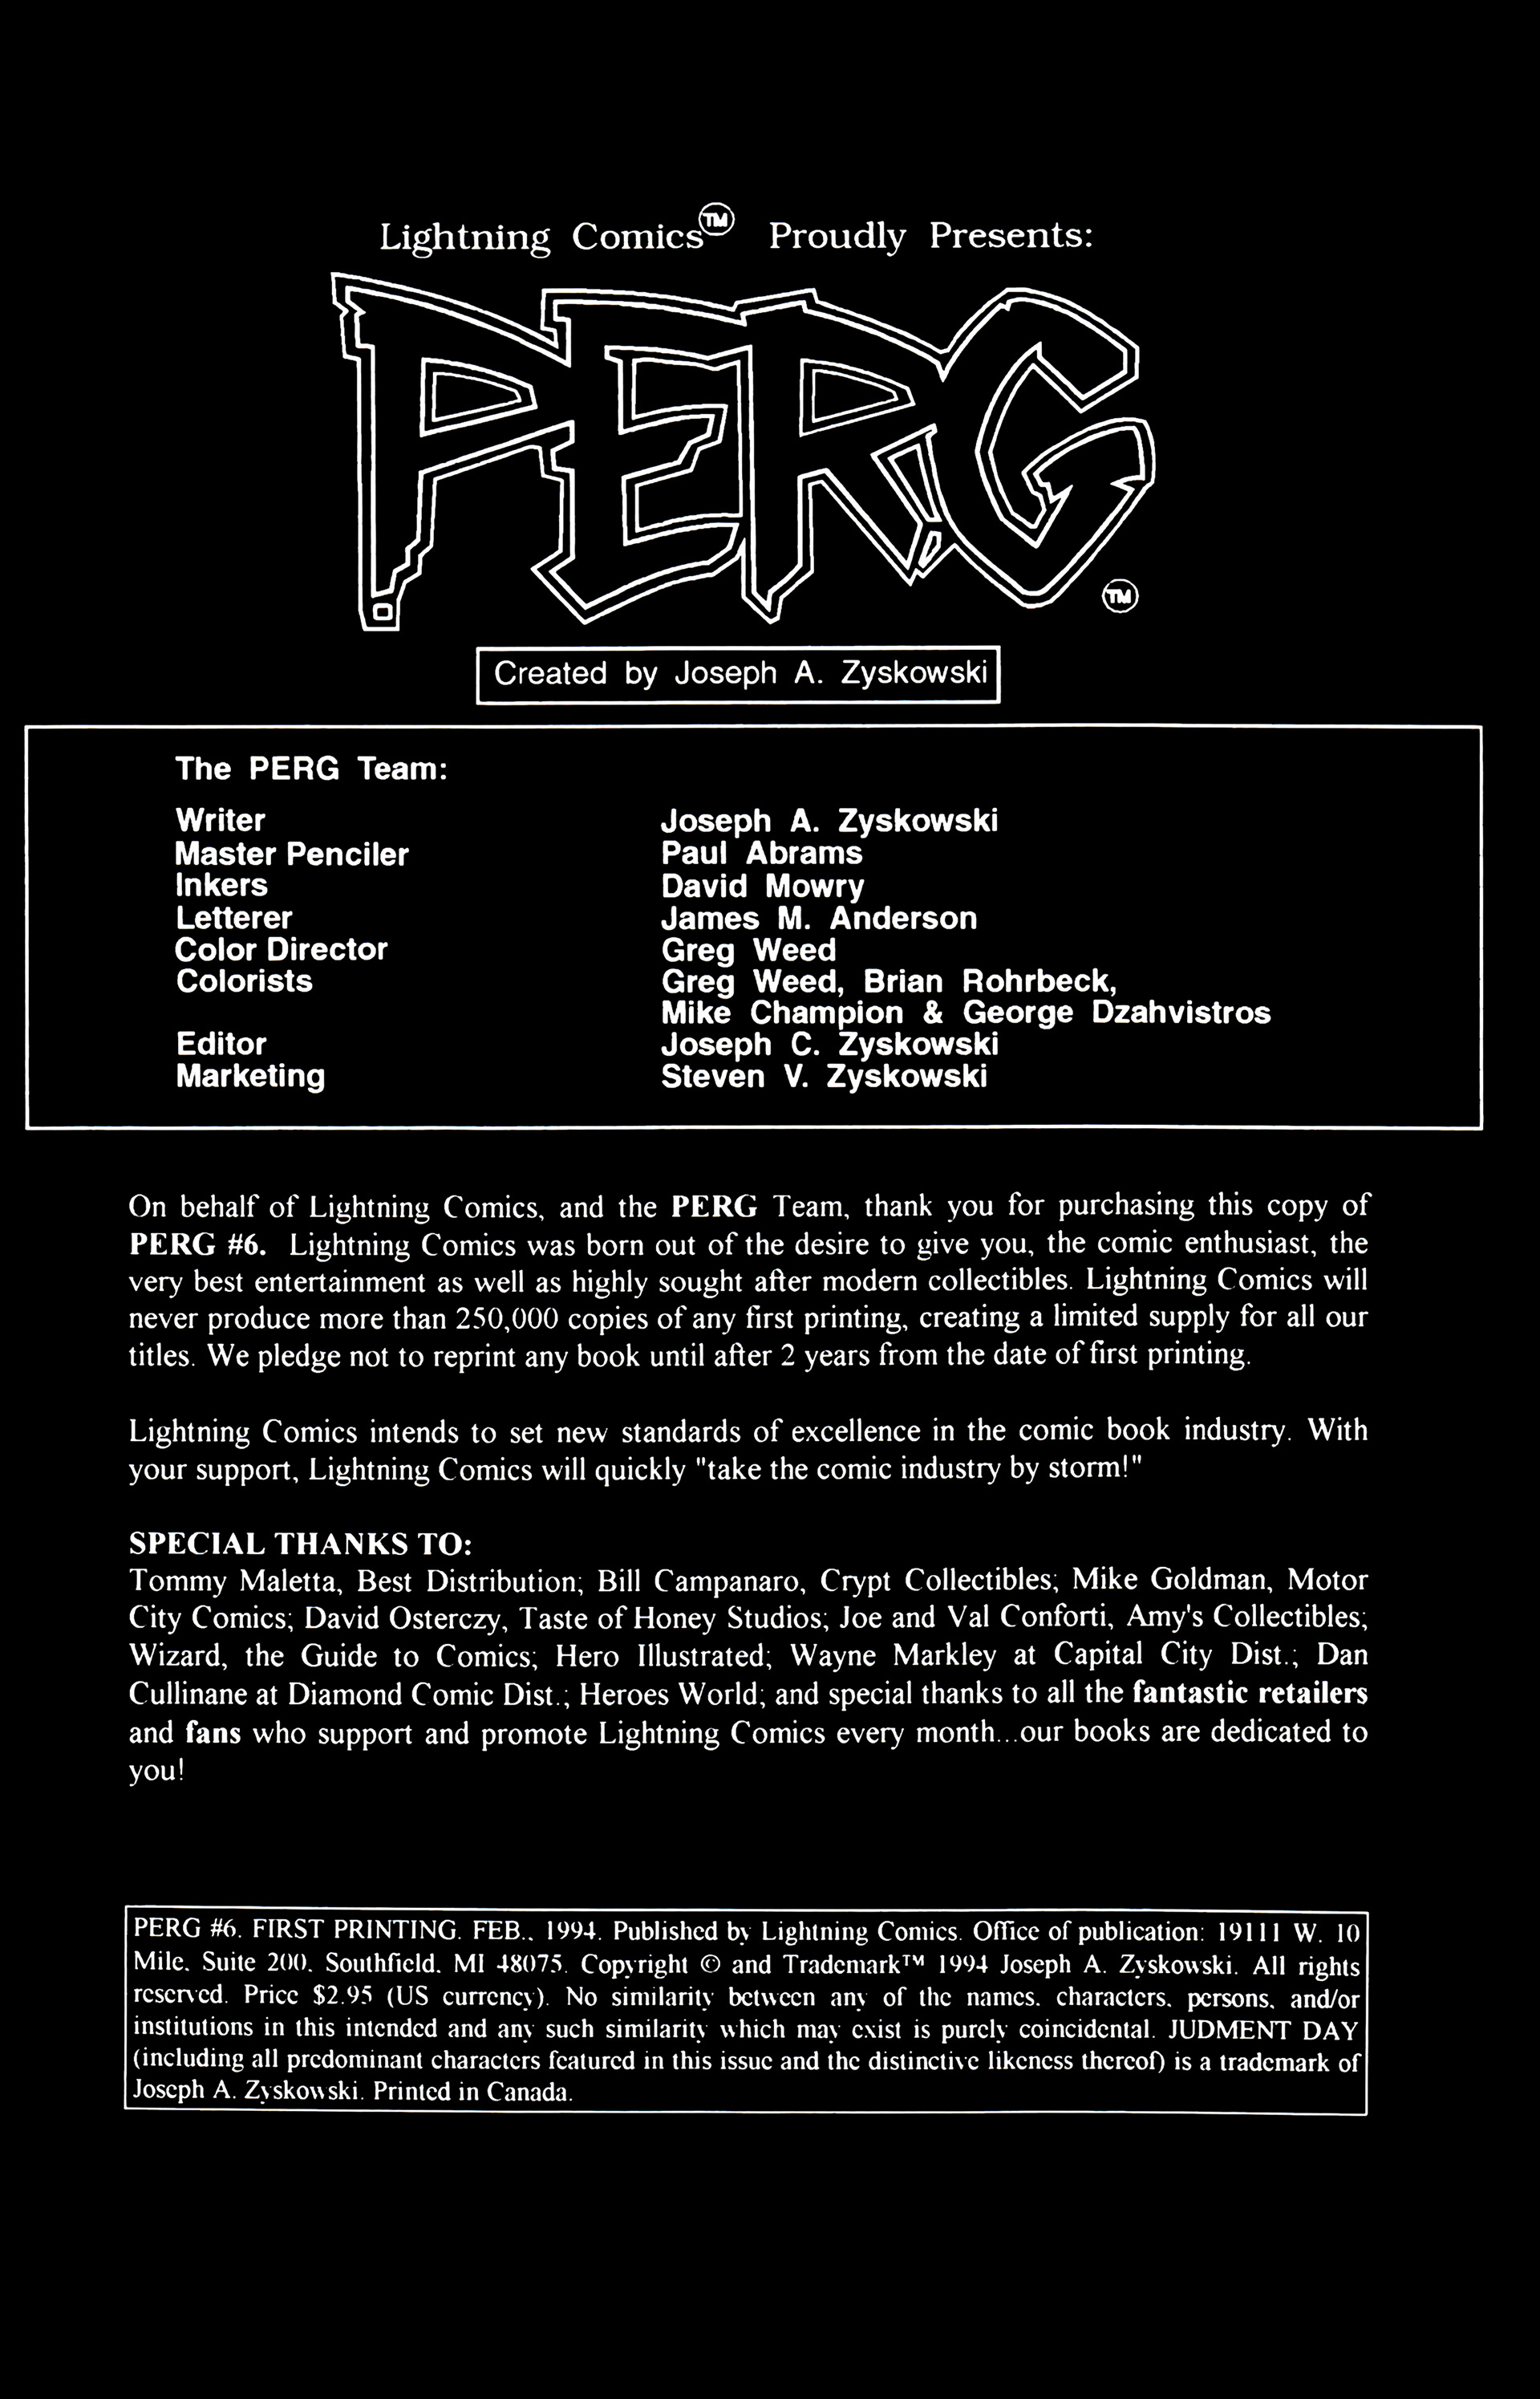 Read online Perg comic -  Issue #6 - 2